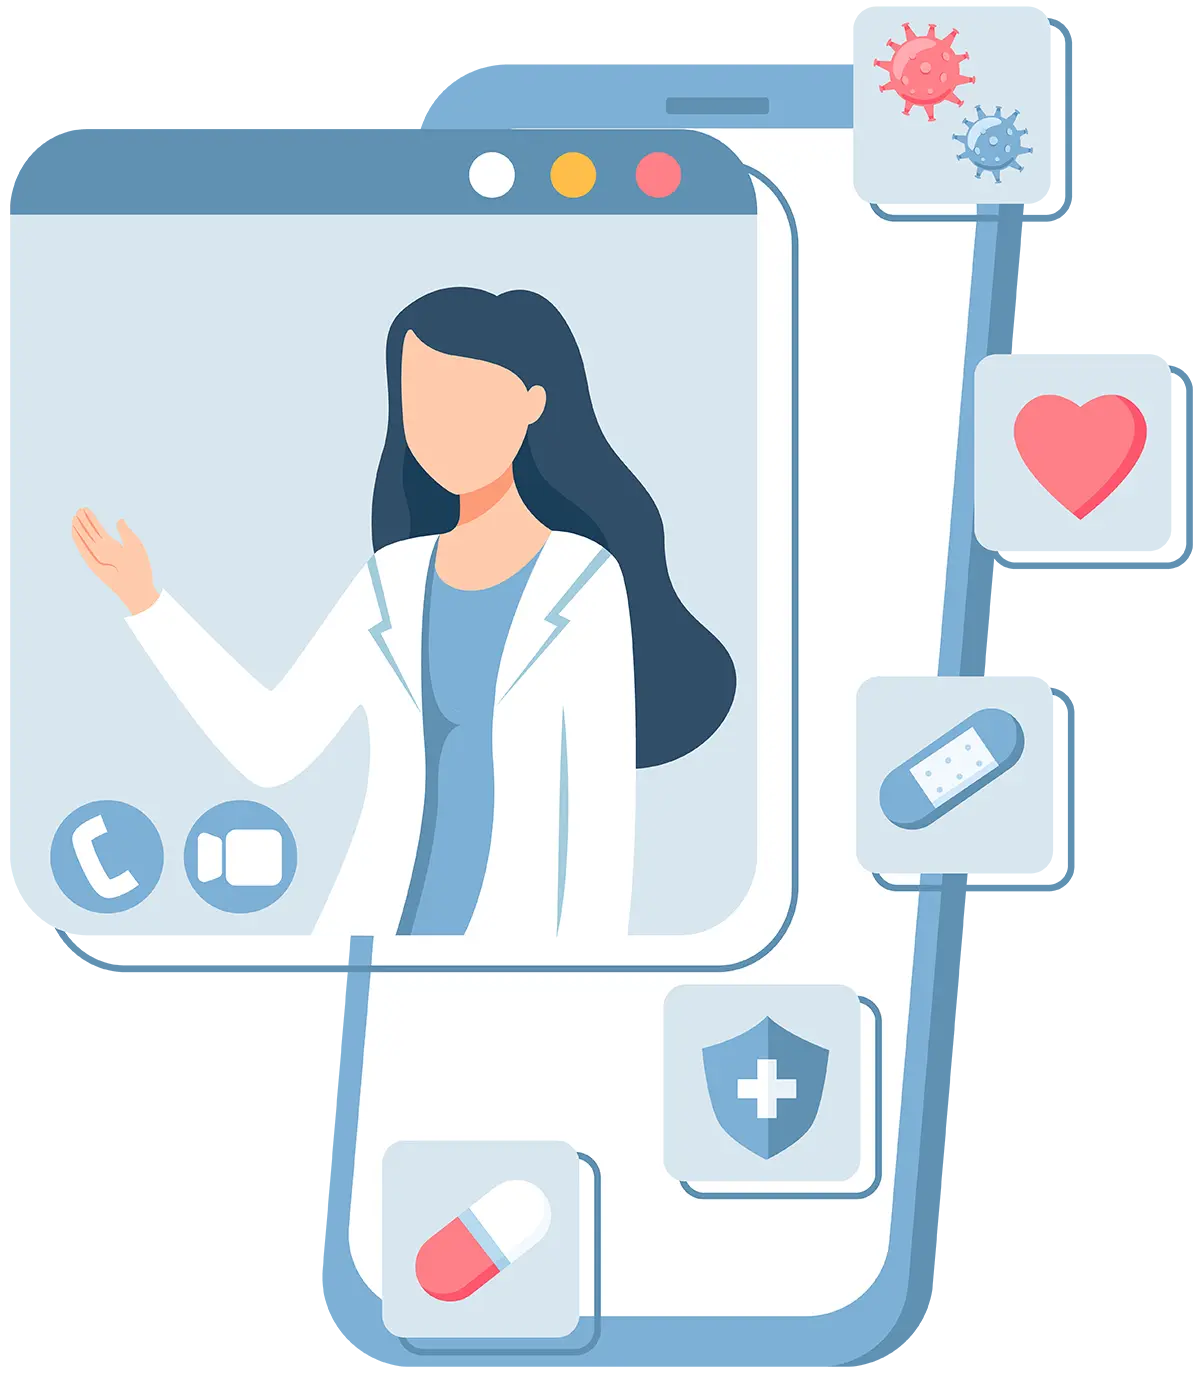 Digital vector illustration of a floating zoomed-out pop-up video call window screenshot from a smartphone with a female doctor figure putting her arm/hand at an angle plus five other floating zoomed-out pop-up screenshots containing health symbology icons like a pill, a health aid shield, a band aid, a heart, and bacteria/virus